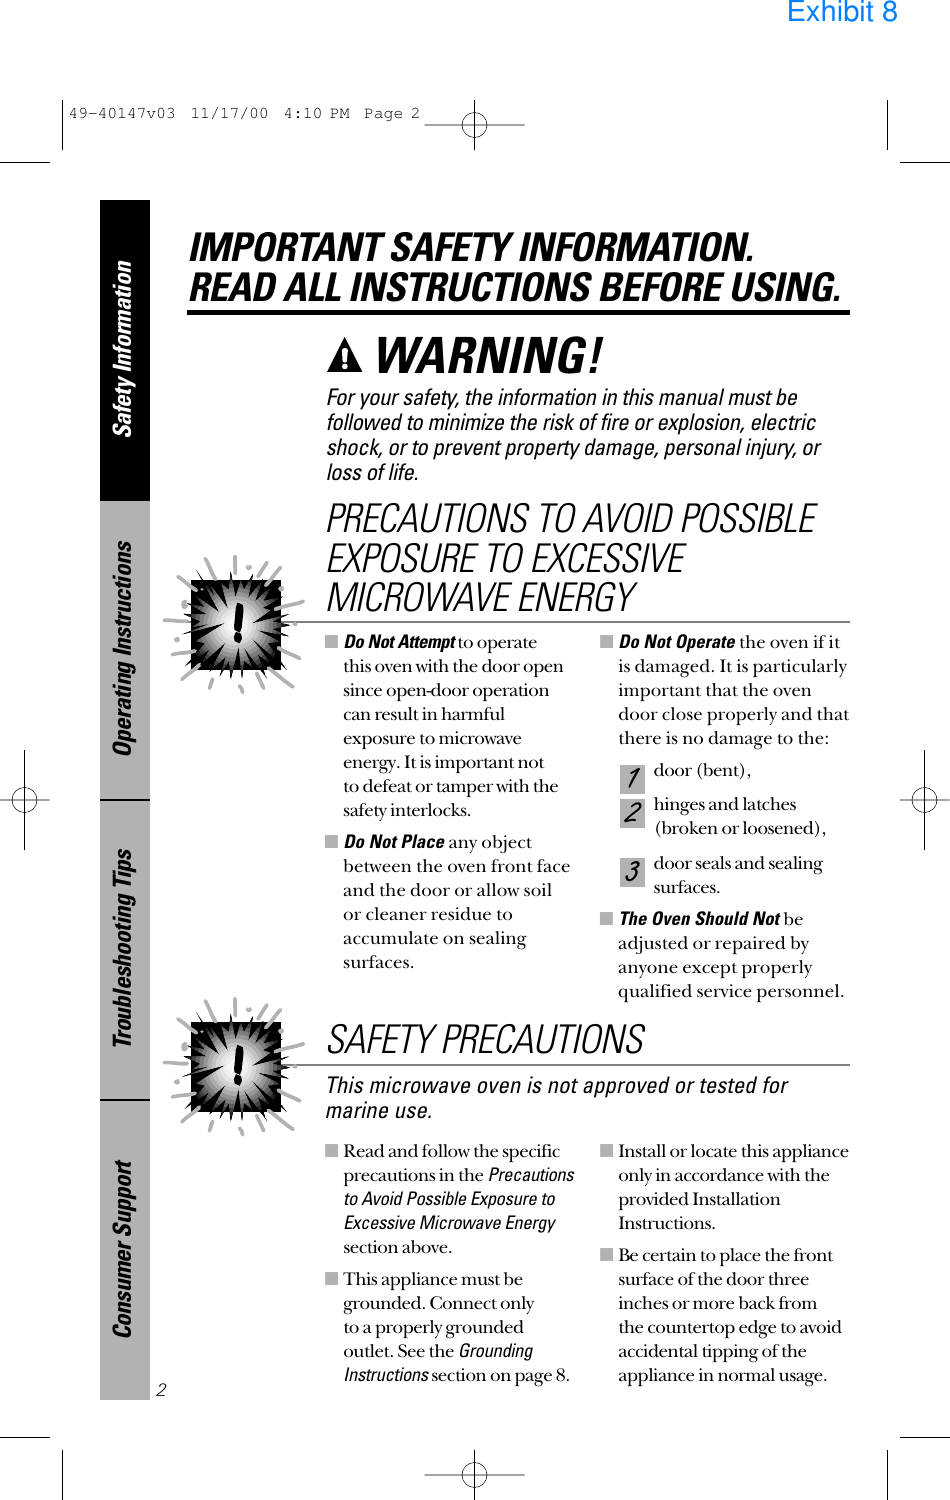 ■Read and follow the specificprecautions in the Precautionsto Avoid Possible Exposure toExcessive Microwave Energysection above.■This appliance must begrounded. Connect only to a properly groundedoutlet. See the GroundingInstructionssection on page 8.■Install or locate this applianceonly in accordance with theprovided InstallationInstructions.■Be certain to place the frontsurface of the door threeinches or more back from the countertop edge to avoidaccidental tipping of theappliance in normal usage.■Do Not Attemptto operate this oven with the door opensince open-door operationcan result in harmfulexposure to microwaveenergy. It is important not to defeat or tamper with thesafety interlocks.■Do Not Place any objectbetween the oven front faceand the door or allow soilor cleaner residue toaccumulate on sealingsurfaces.■Do Not Operate the oven if itis damaged. It is particularlyimportant that the ovendoor close properly and thatthere is no damage to the:door (bent),hinges and latches (broken or loosened),door seals and sealingsurfaces.■The Oven Should Not beadjusted or repaired byanyone except properlyqualified service personnel.321PRECAUTIONS TO AVOID POSSIBLEEXPOSURE TO EXCESSIVEMICROWAVE ENERGYSafety InformationOperating InstructionsTroubleshooting TipsConsumer SupportIMPORTANT SAFETY INFORMATION.READ ALL INSTRUCTIONS BEFORE USING.2For your safety, the information in this manual must befollowed to minimize the risk of fire or explosion, electricshock, or to prevent property damage, personal injury, or loss of life.WARNING! This microwave oven is not approved or tested formarine use.SAFETY PRECAUTIONS49-40147v03  11/17/00  4:10 PM  Page 2Exhibit 8